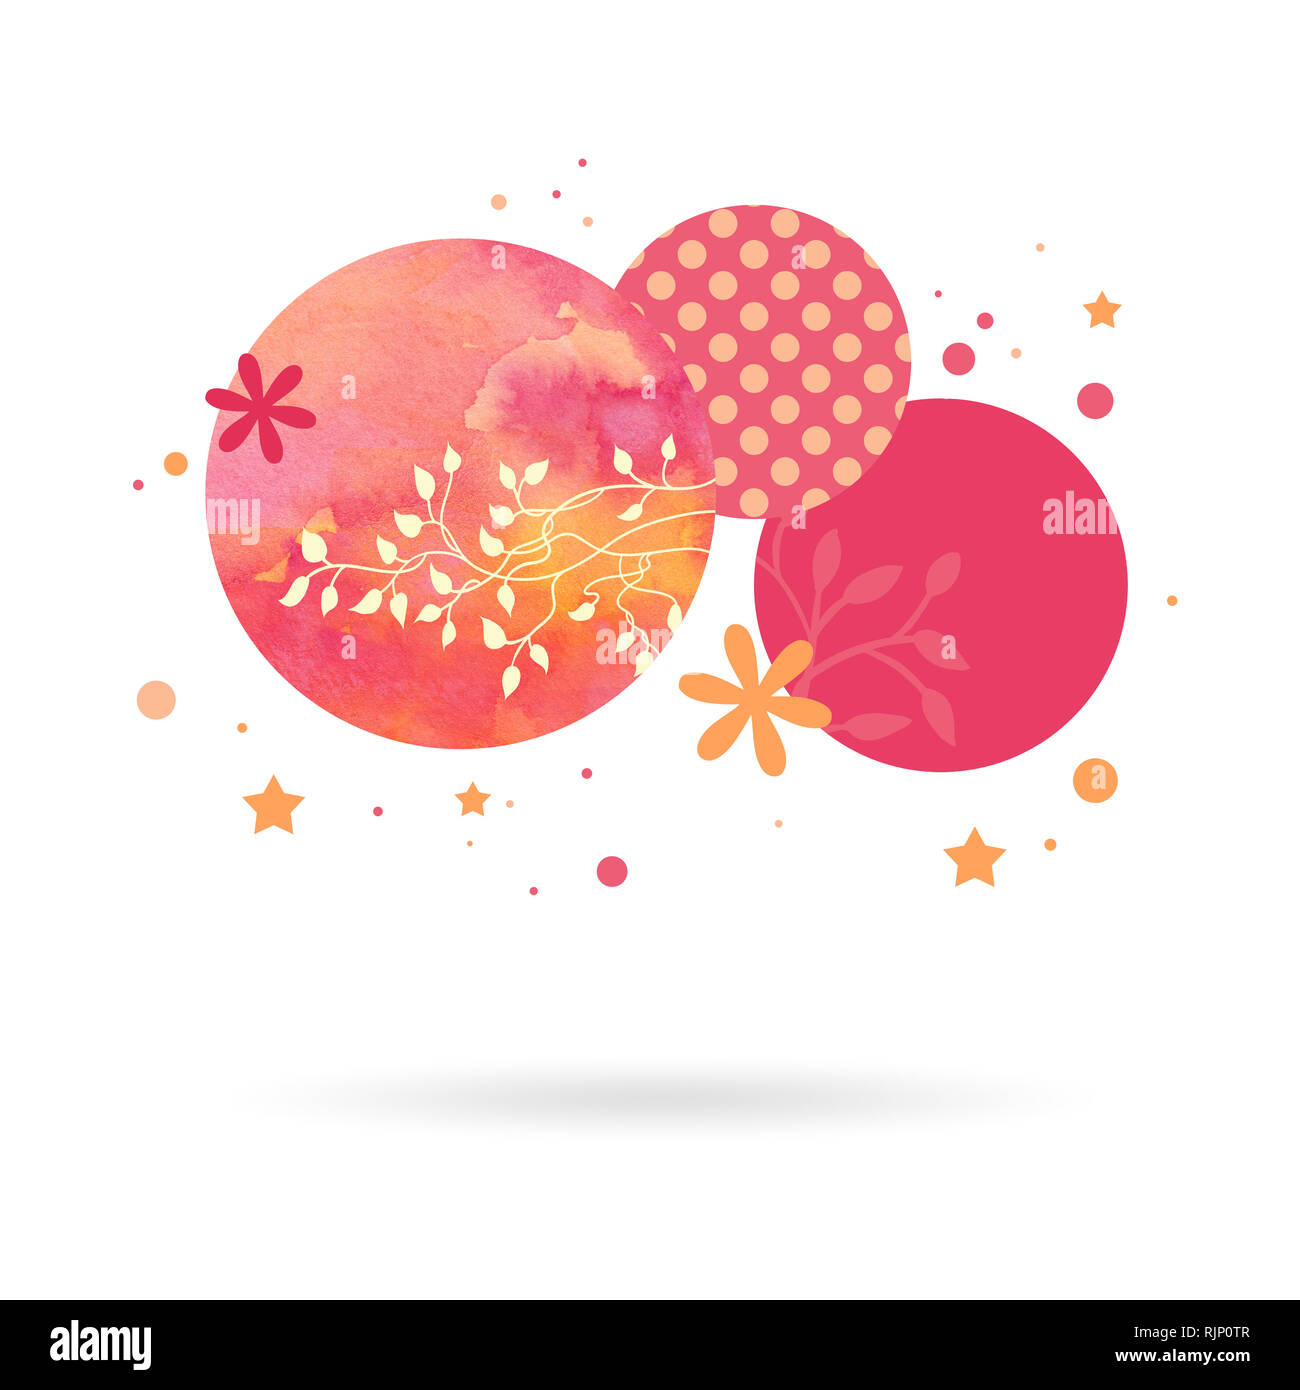 Abstract modern graphic design elements. Circle star shapes with polka dots and watercolor painted background texture are layered in pink and orange Stock Photo